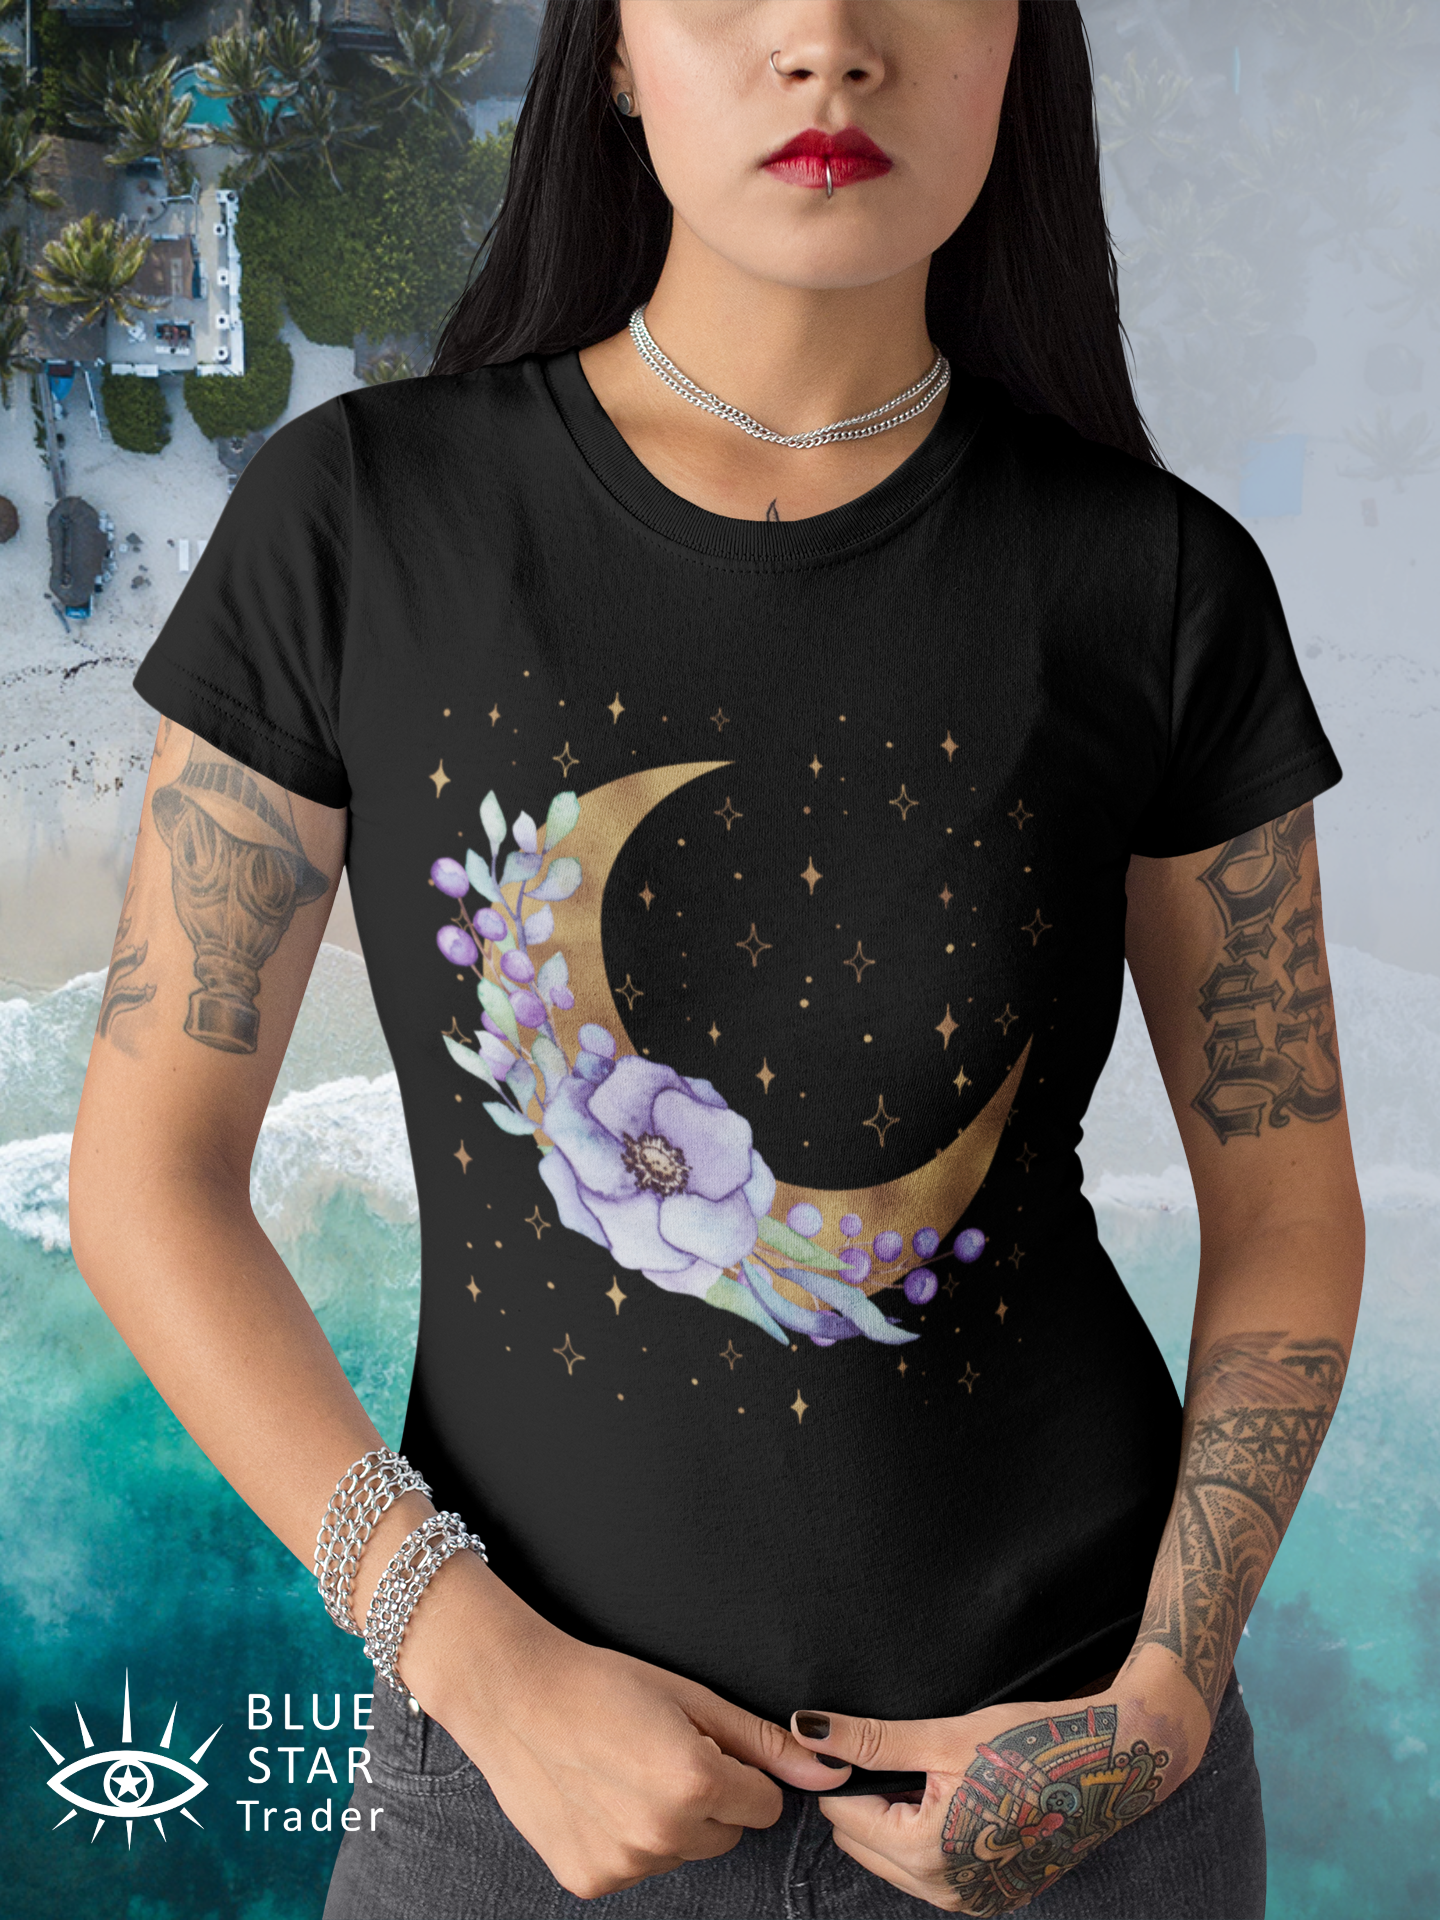 Purple Moon Floral Black Tee, Witch Shirt, Unisex Jersey Short Sleeve Tee, Womens Bella Canvas T-Shirt, Flowers Wicca Clothing Clothes